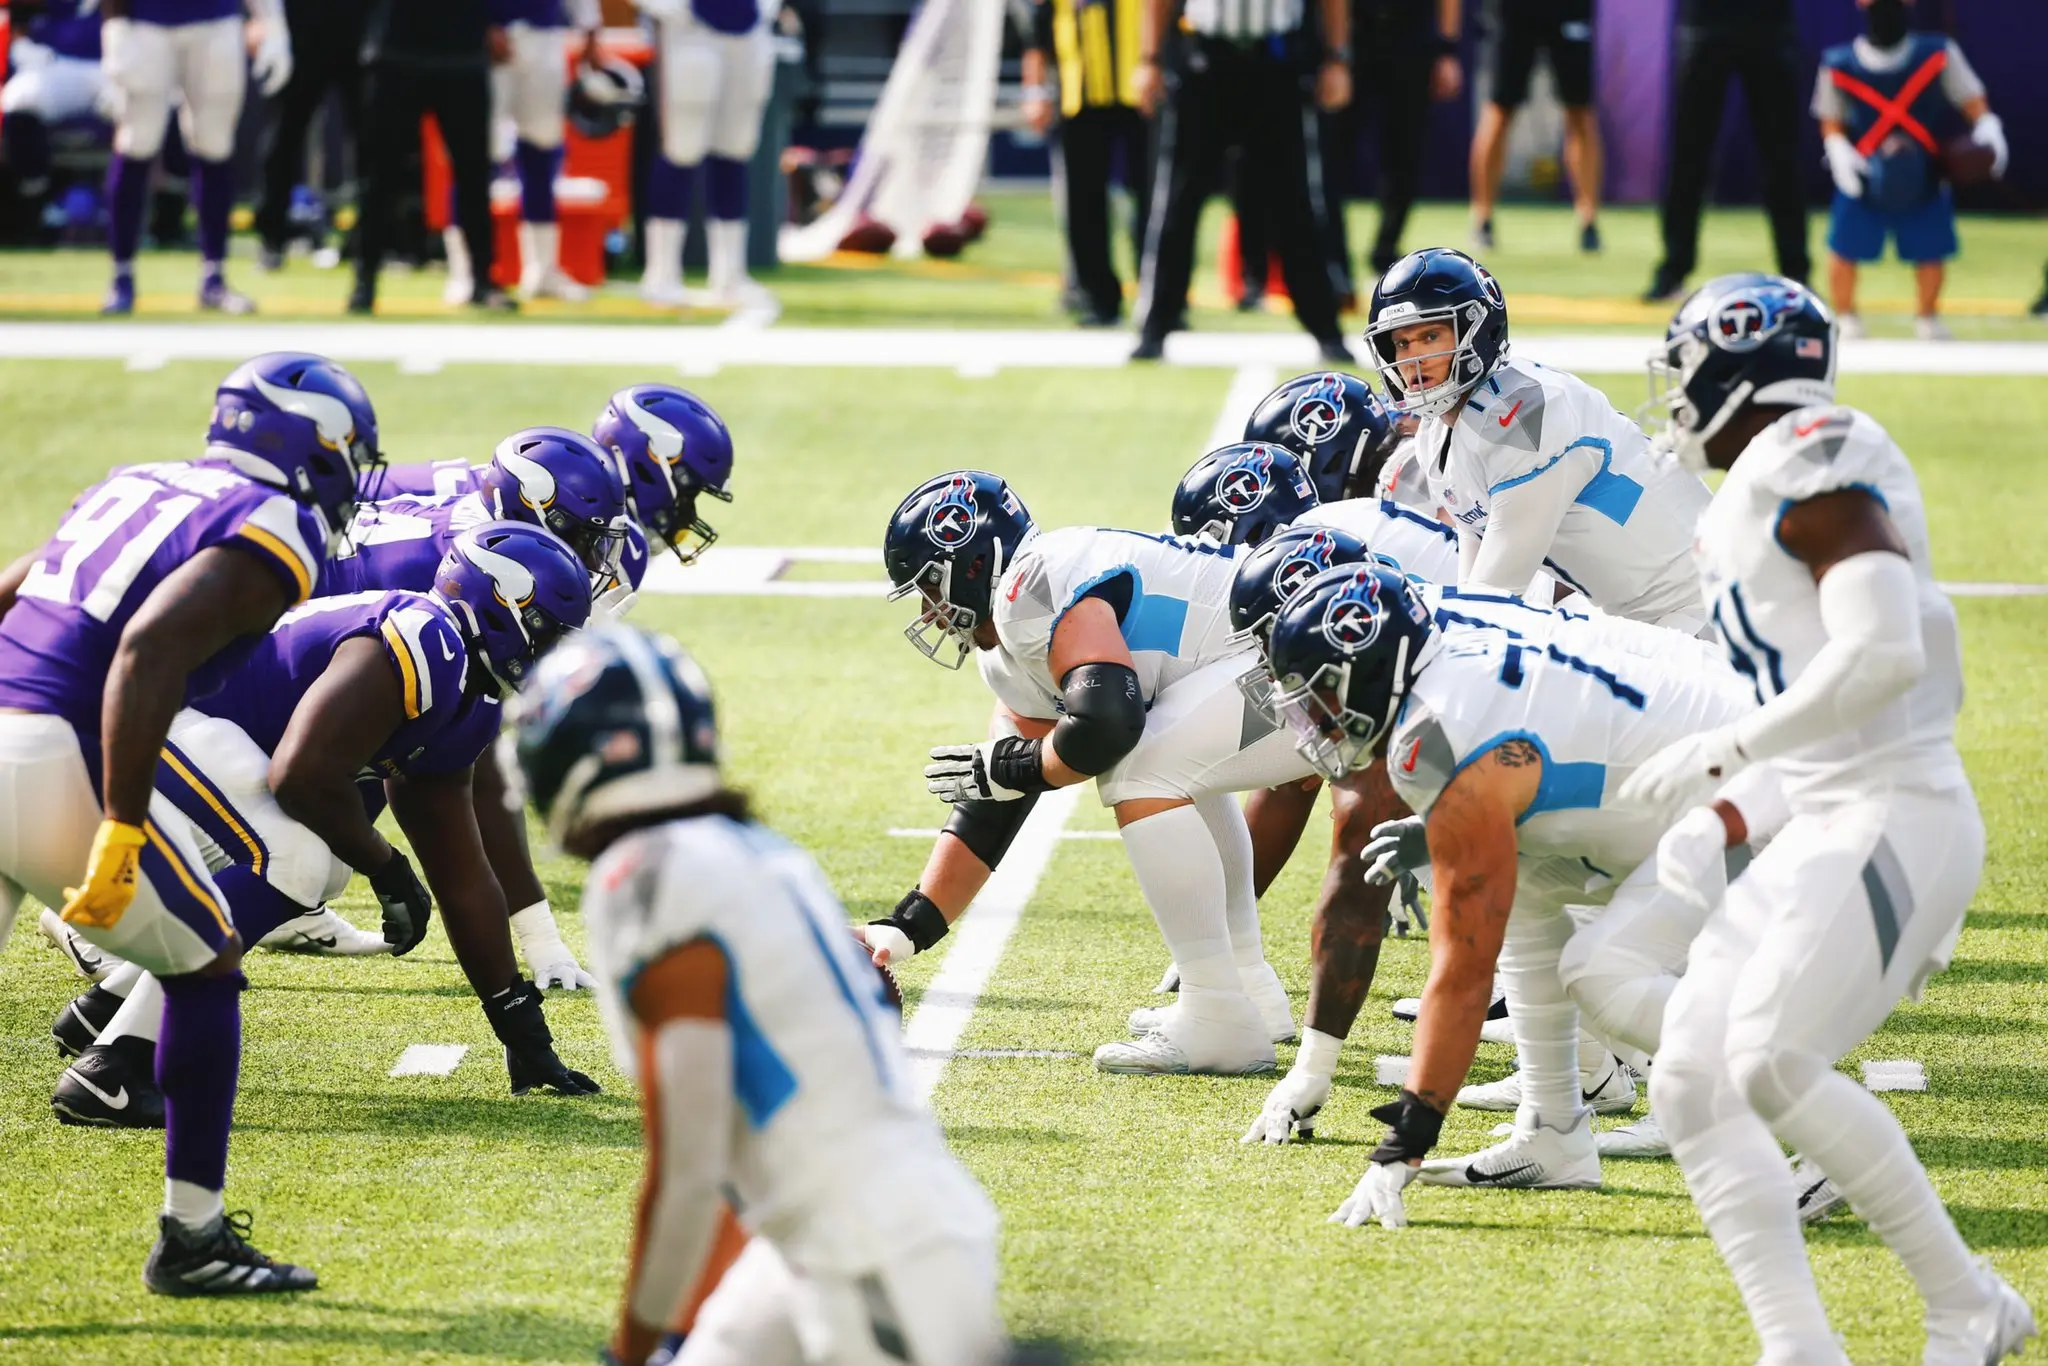 Ryan Tennehill and Tennessee Titans offense